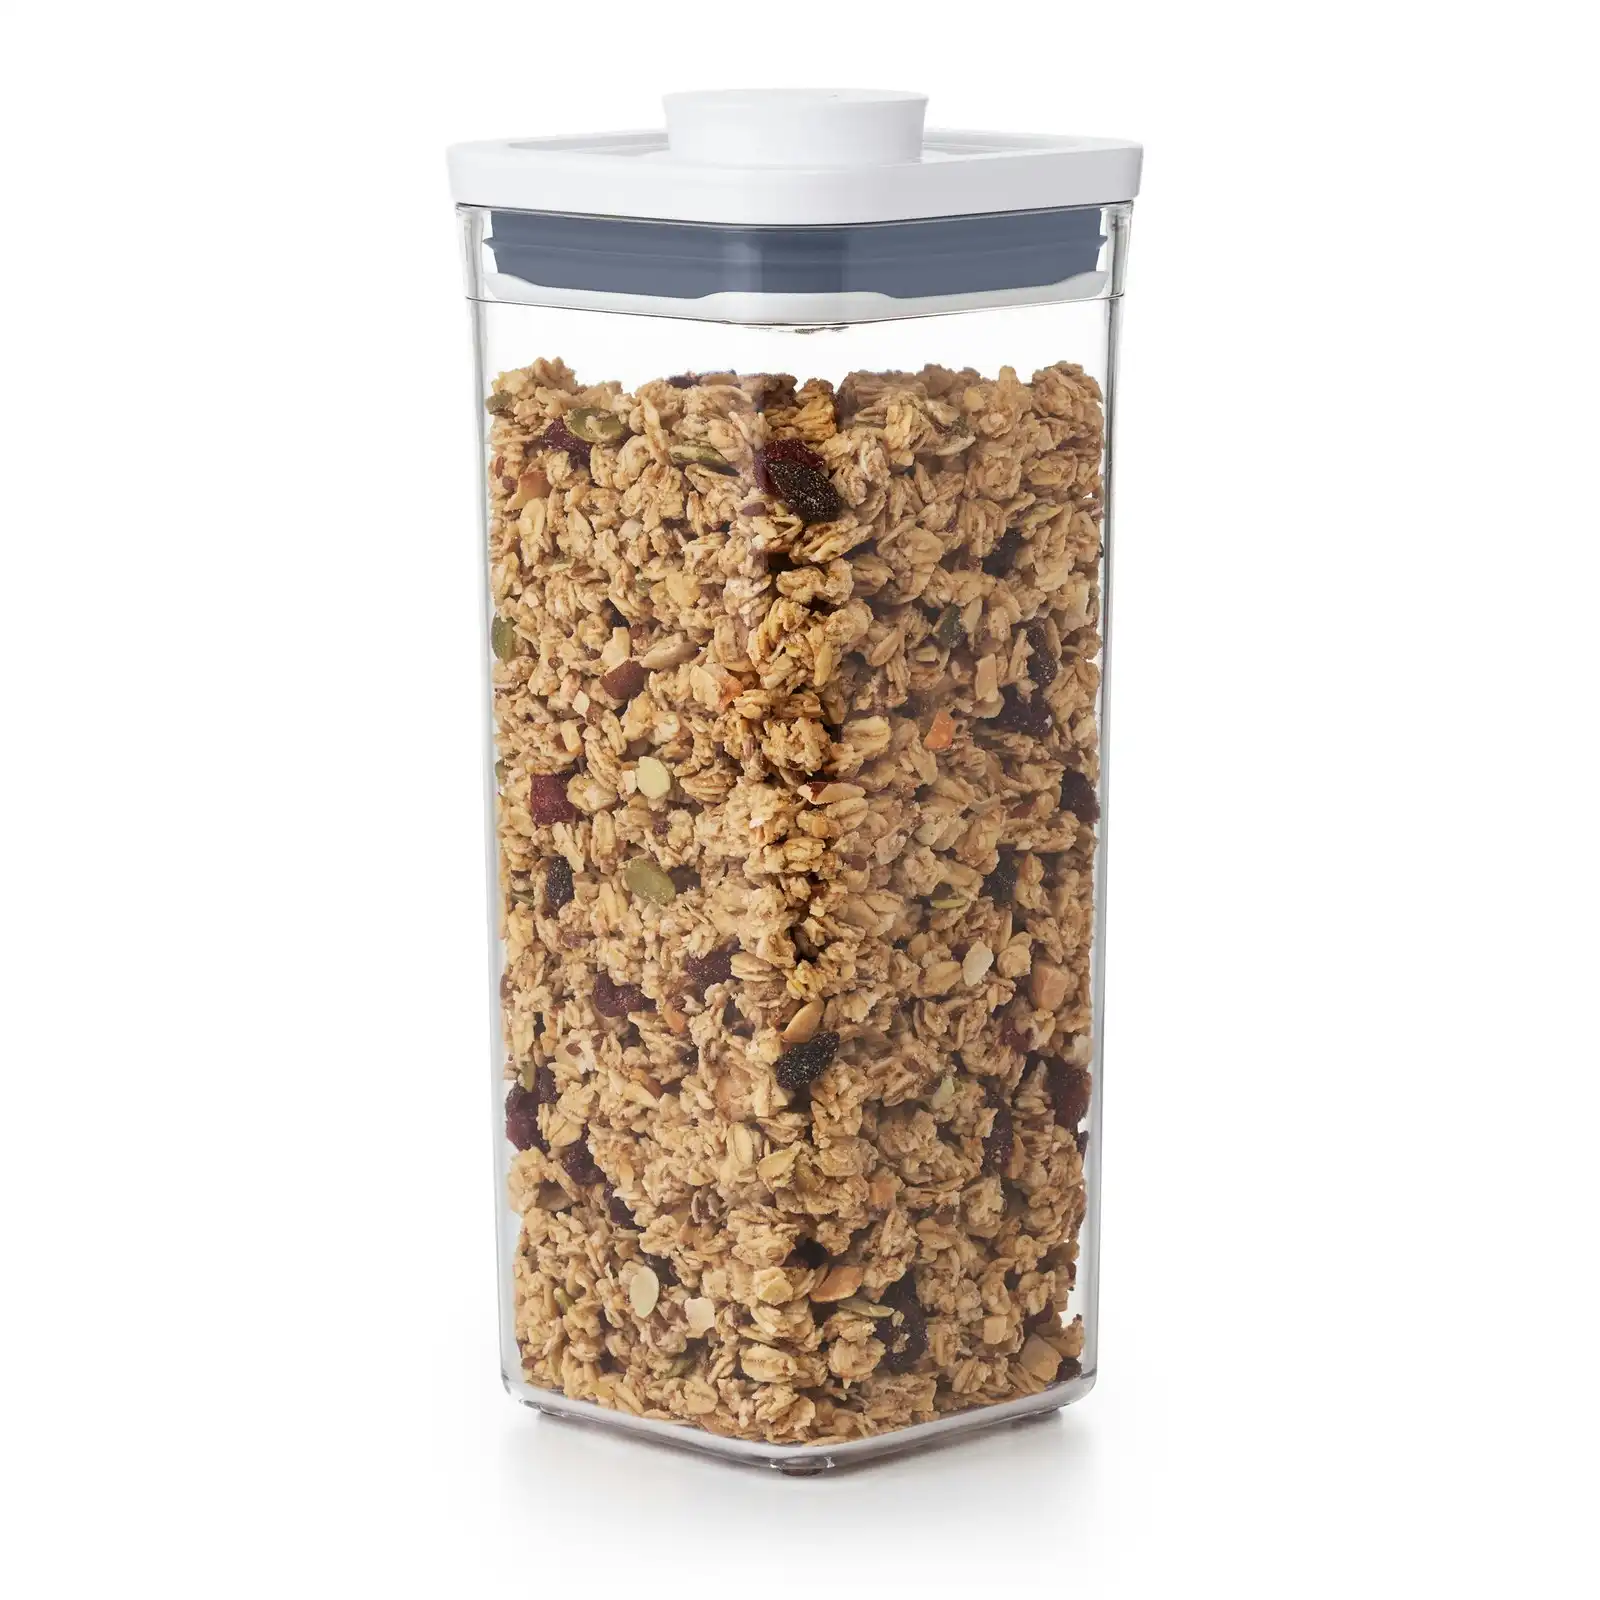 OXO Good Grips POP 2.0 1.4L Container Small Square - Medium